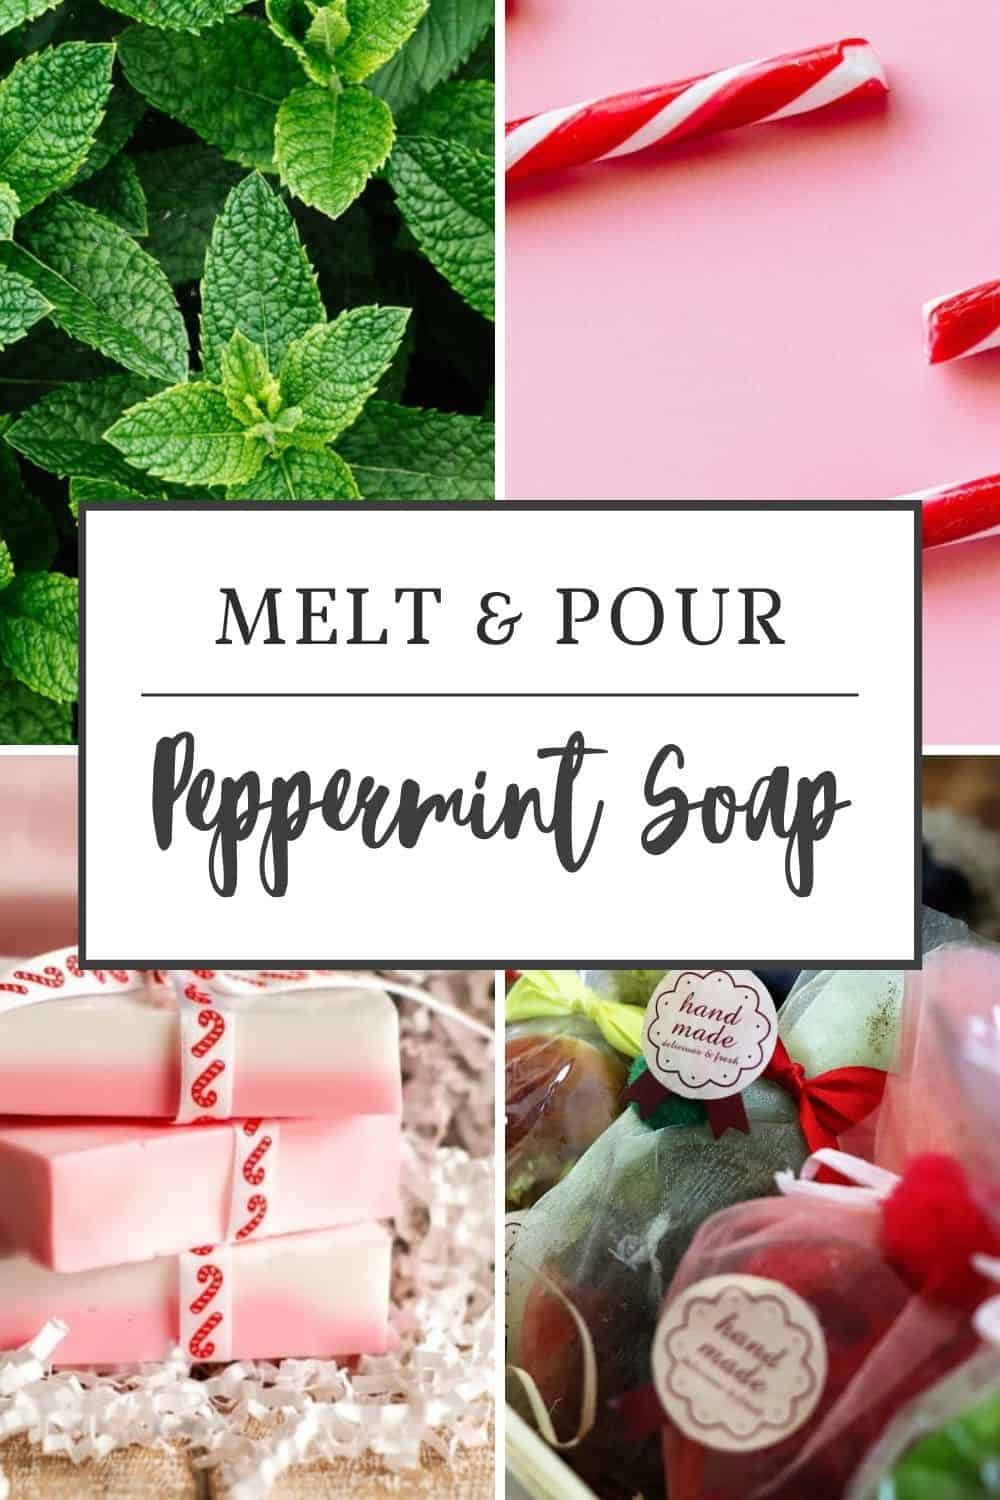 If you’re looking for a peppermint soap recipe that’s moisturizing and gentle on your skin, you’re going to love this! Make it today.